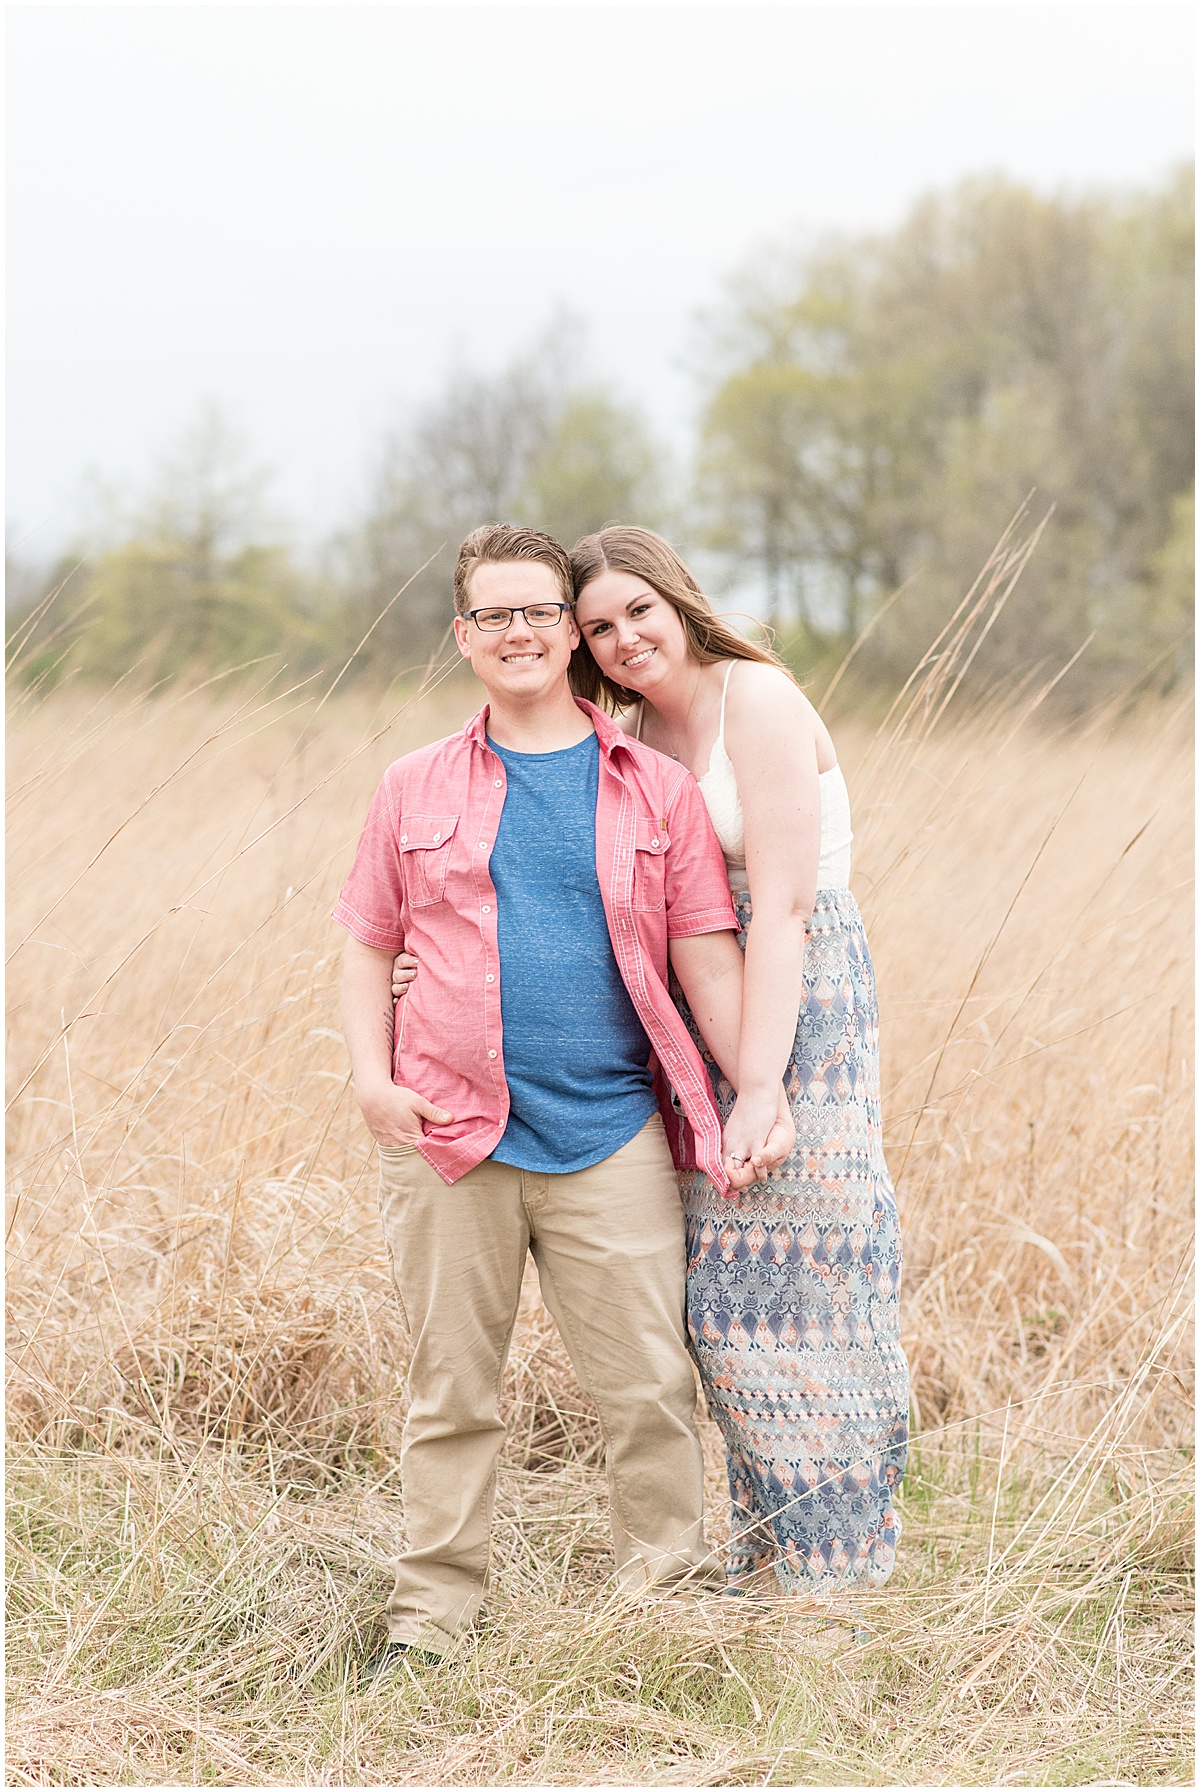 Spring Engagement Photos at the Celery Bog in West Lafayette, Indiana